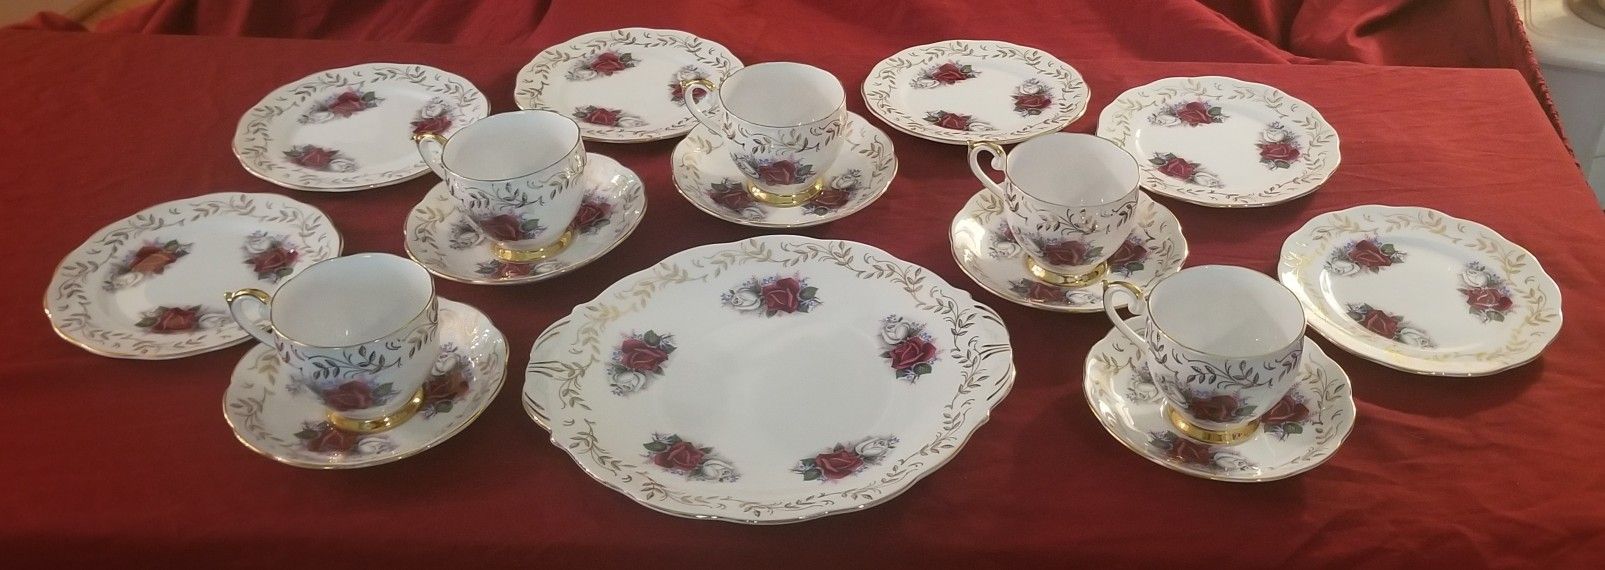 Set of Vintage Queen Anne China